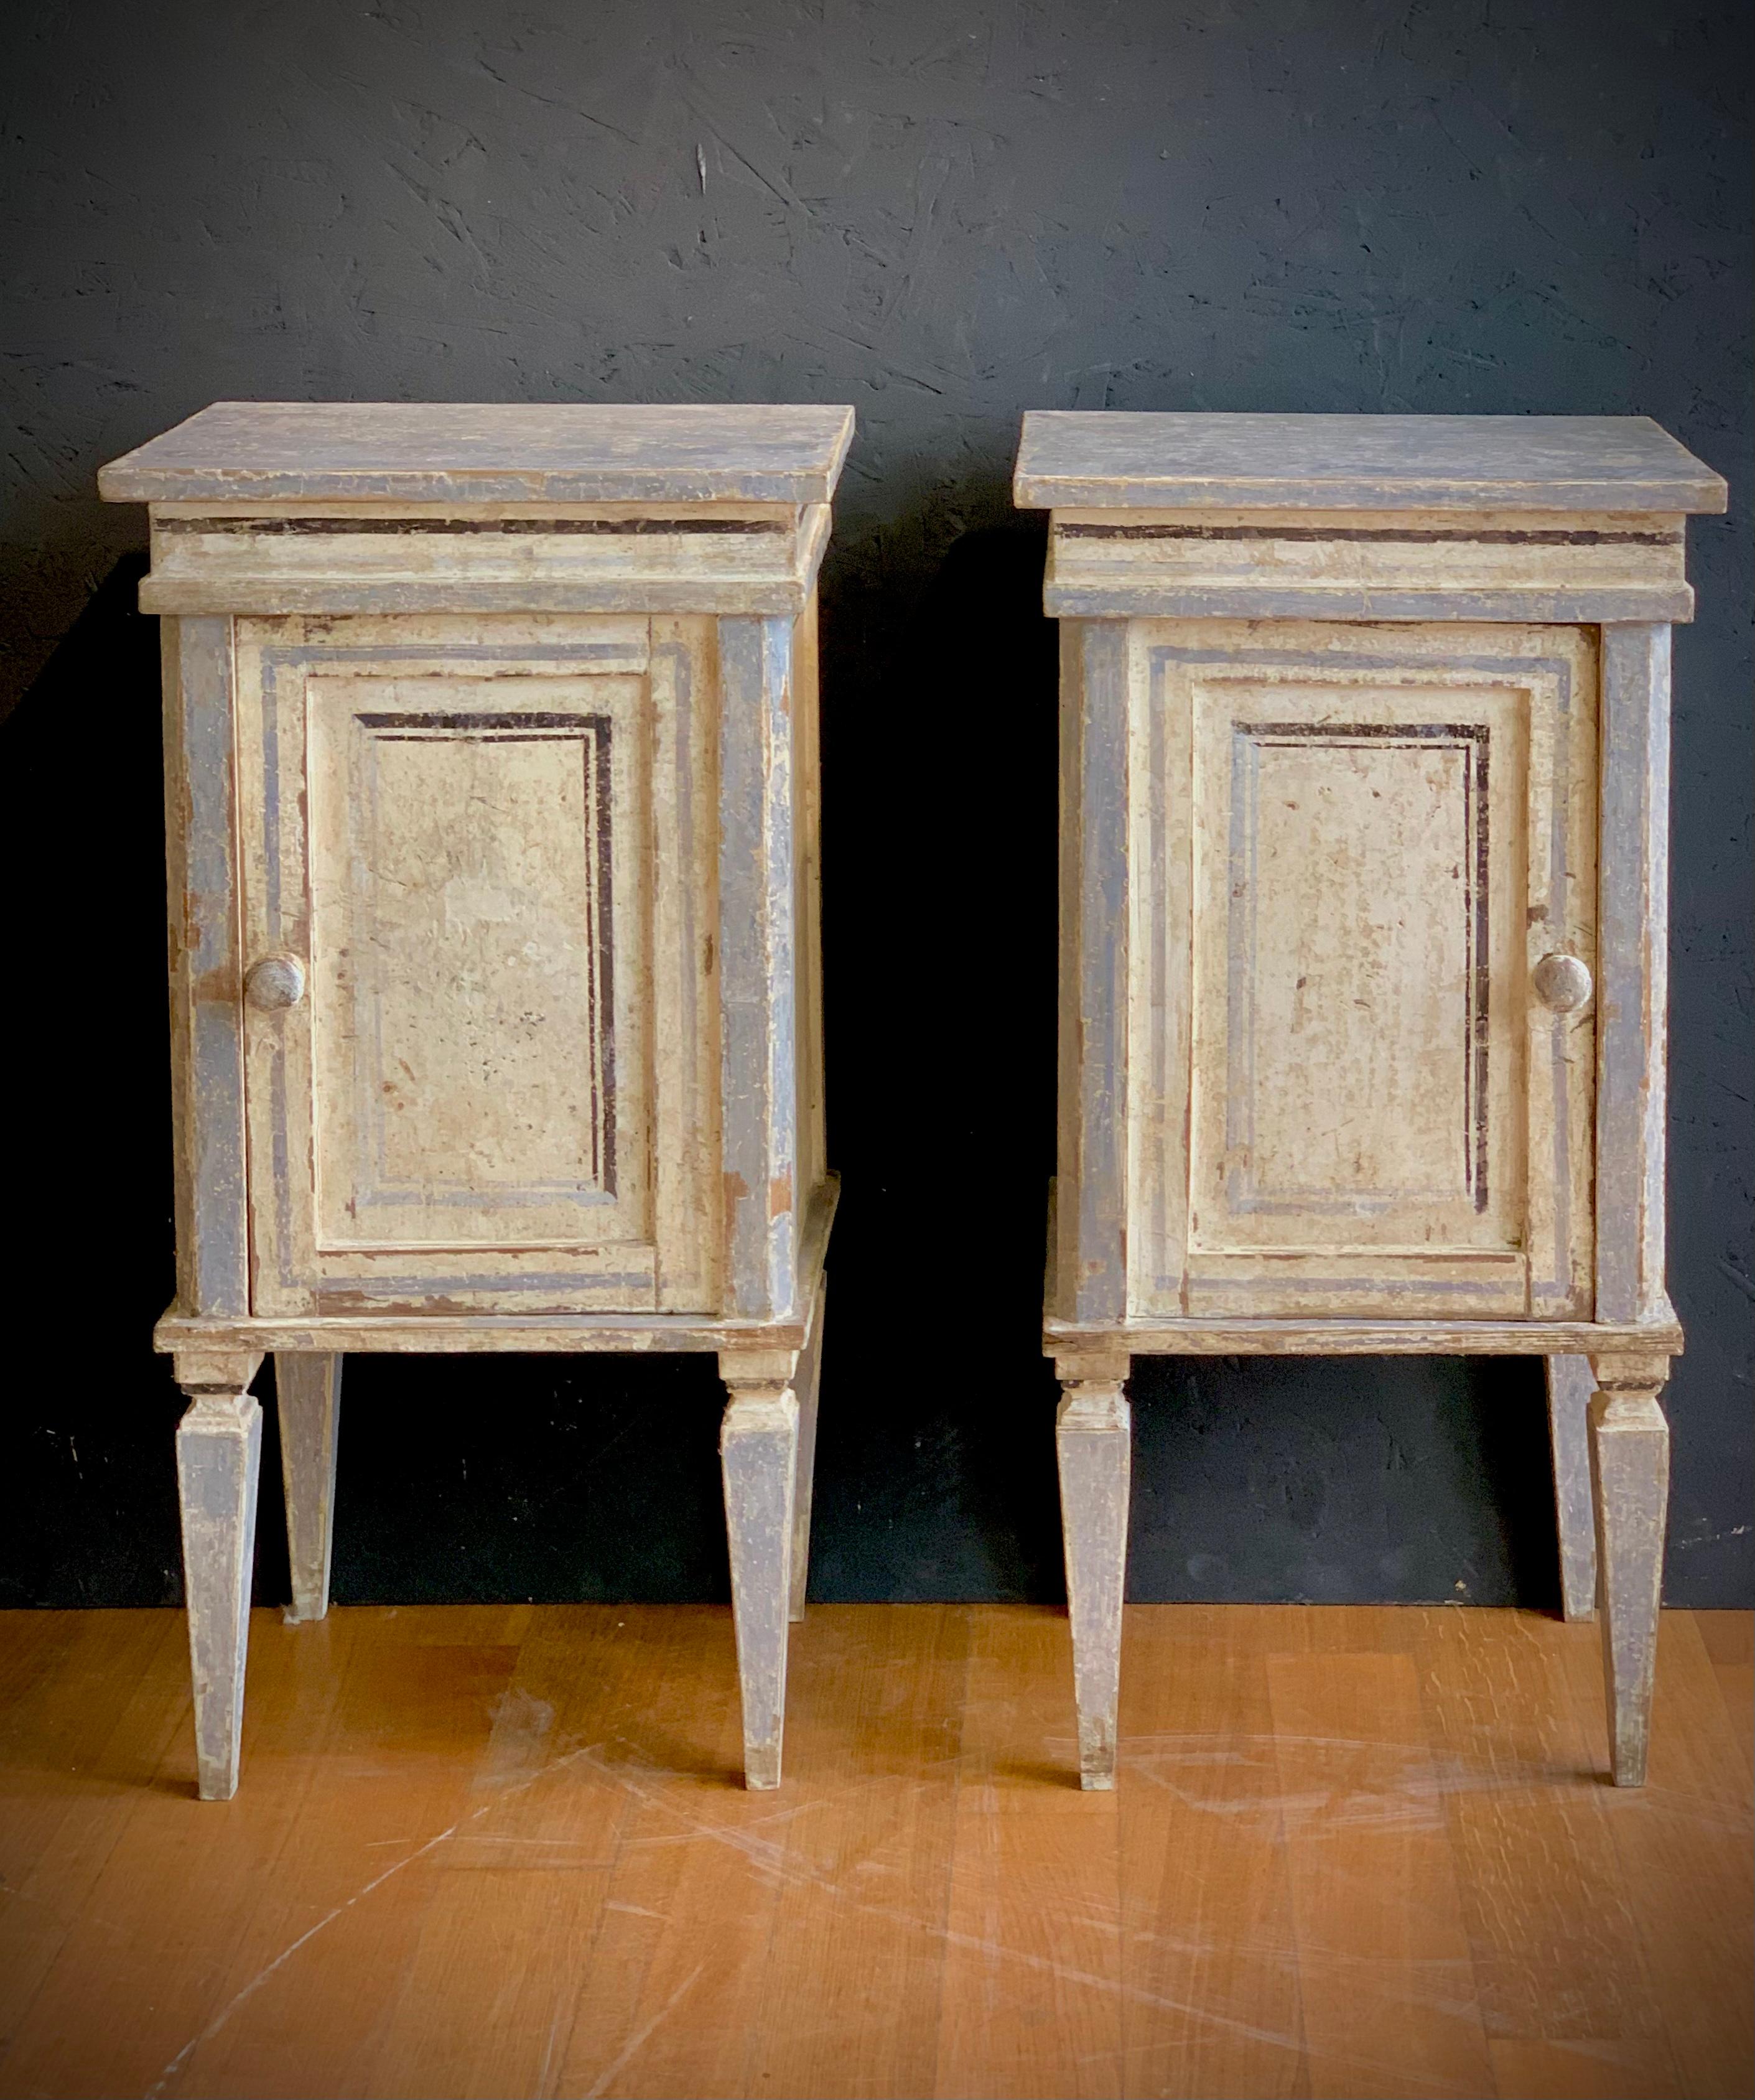 Elegant pair of nightstands in fir wood painted in lean tempera on a chalky background. Classic pastel colors in shades of gray, with a single door, supported by four truncated pyramidal legs. Typical TUSCAN manufacture from the neoclassical period.